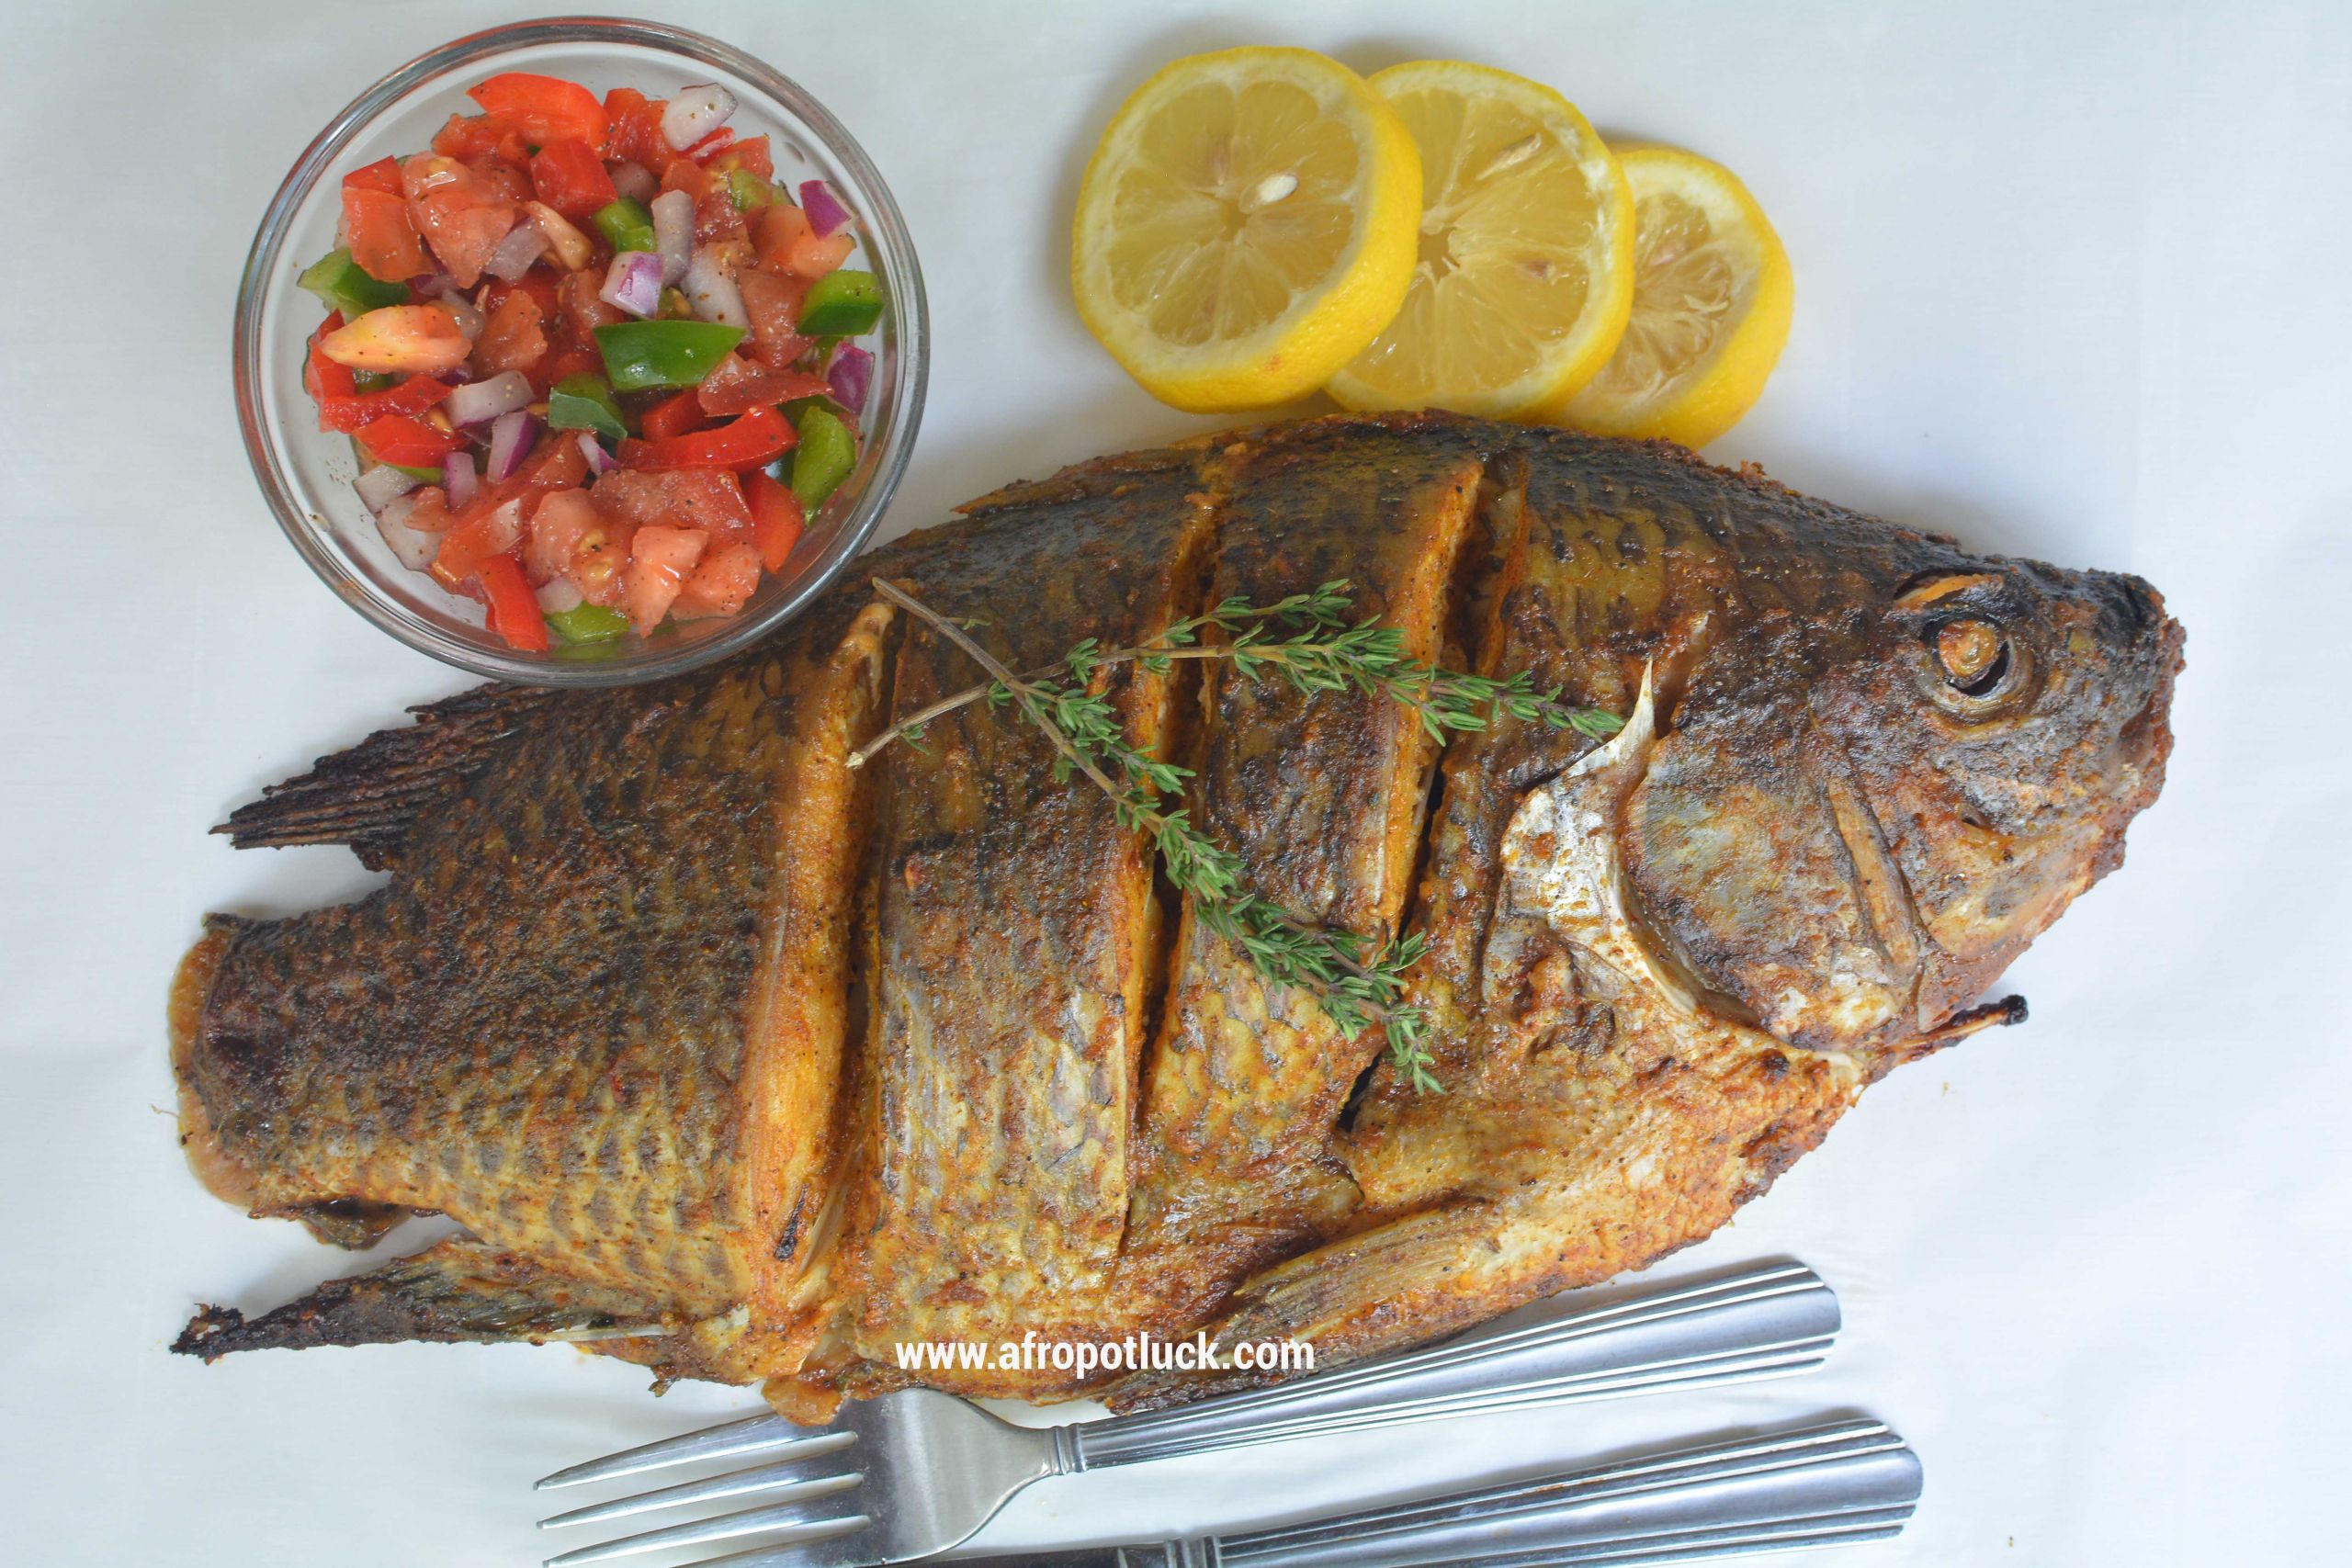 Recipes For Tilapia Fish In The Oven
 How to make Oven Grilled Tilapia Fish AfropotluckAfrican